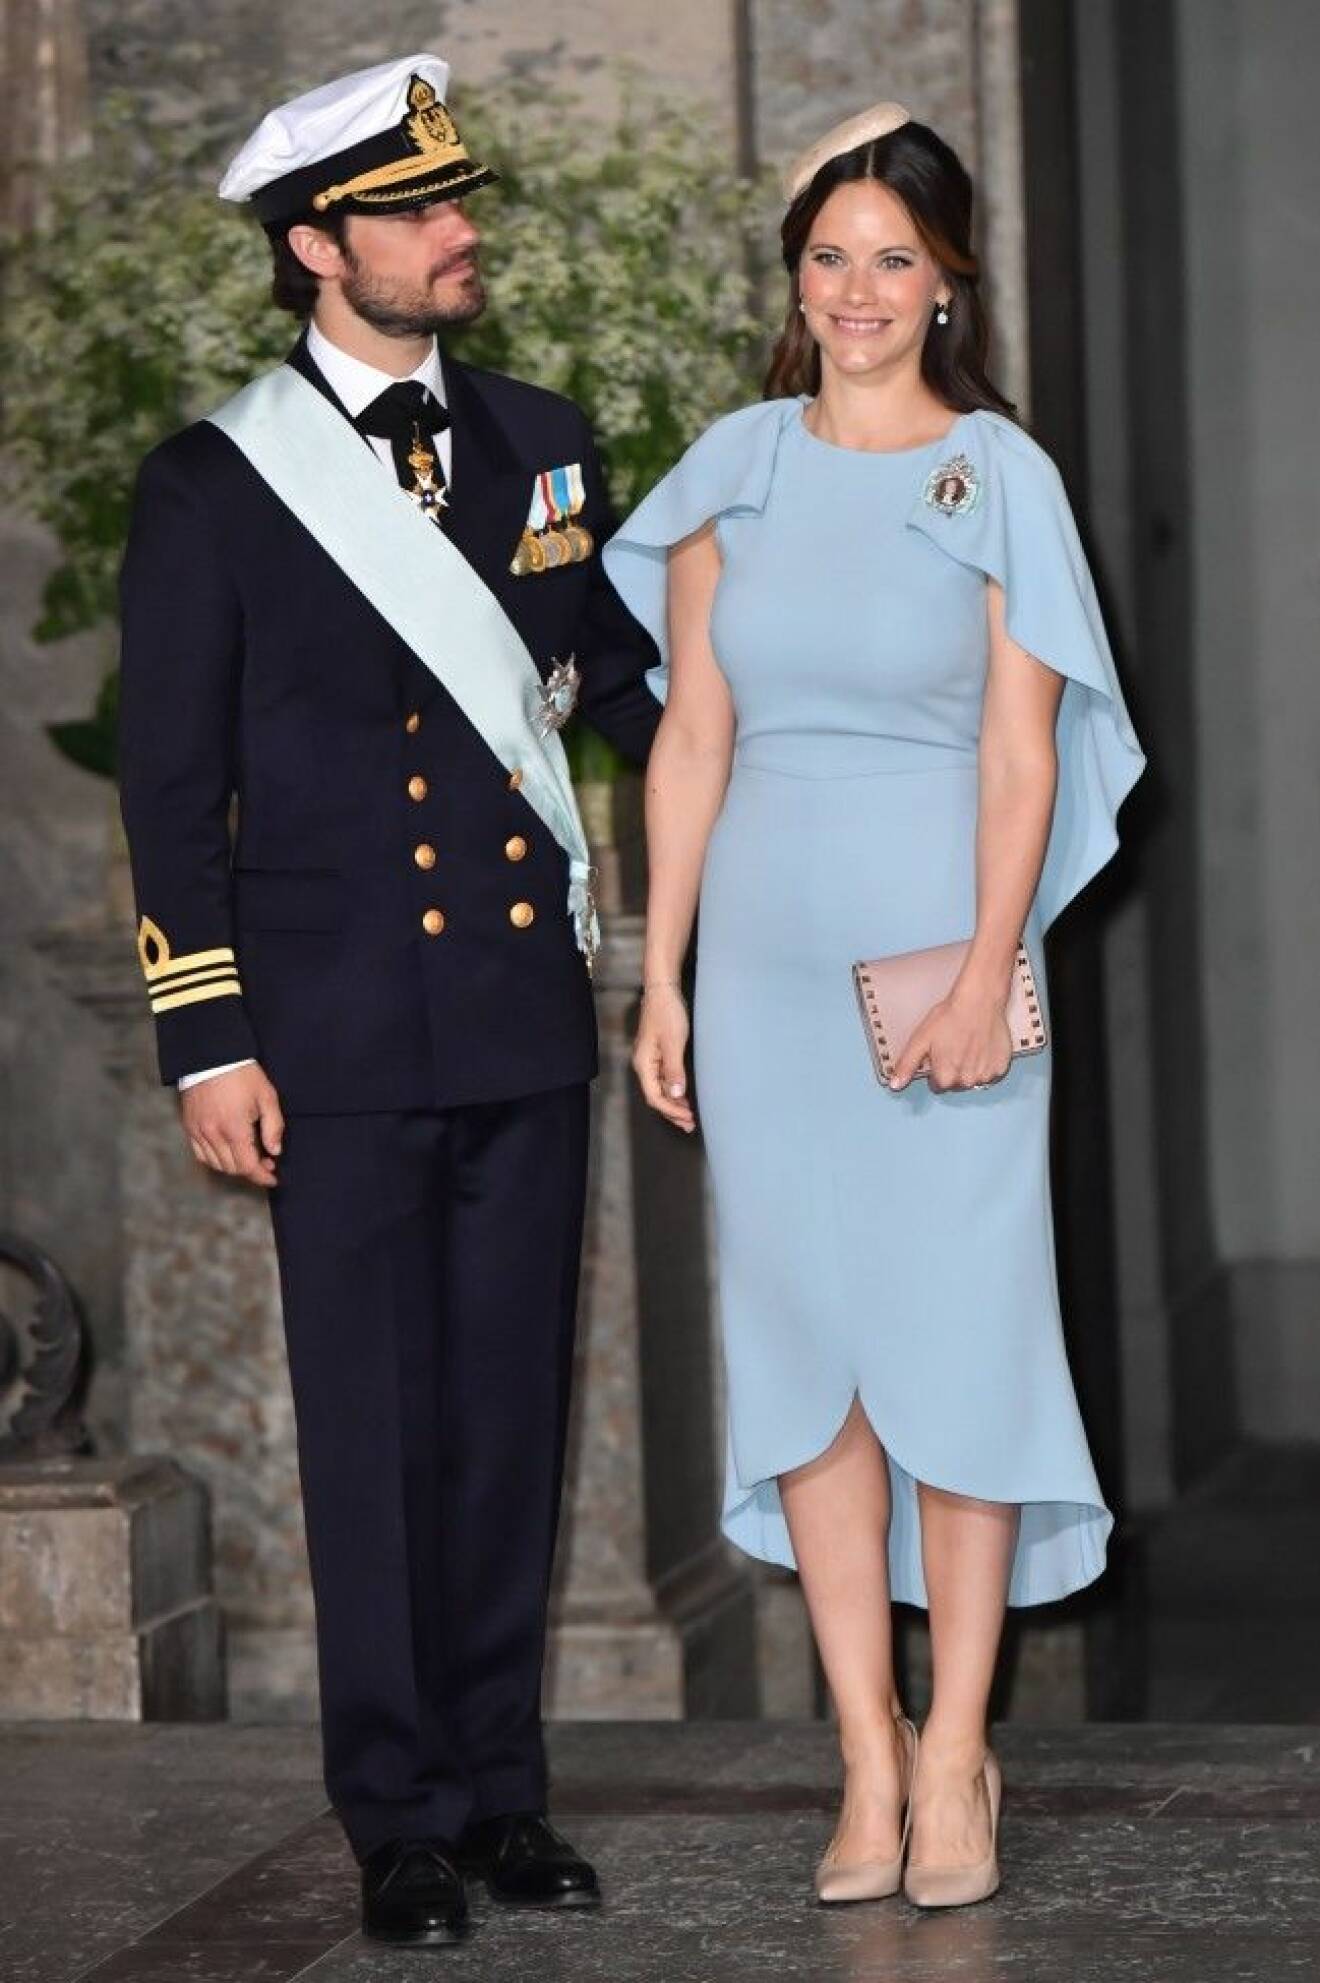 Mandatory Credit: Photo by Tim Rooke/REX/Shutterstock (5696585au) Prince Carl Philip and Princess Sofia of Sweden Prince Oscar of Sweden Christening, The Royal Palace, Stockholm, Sweden - 27 May 2016